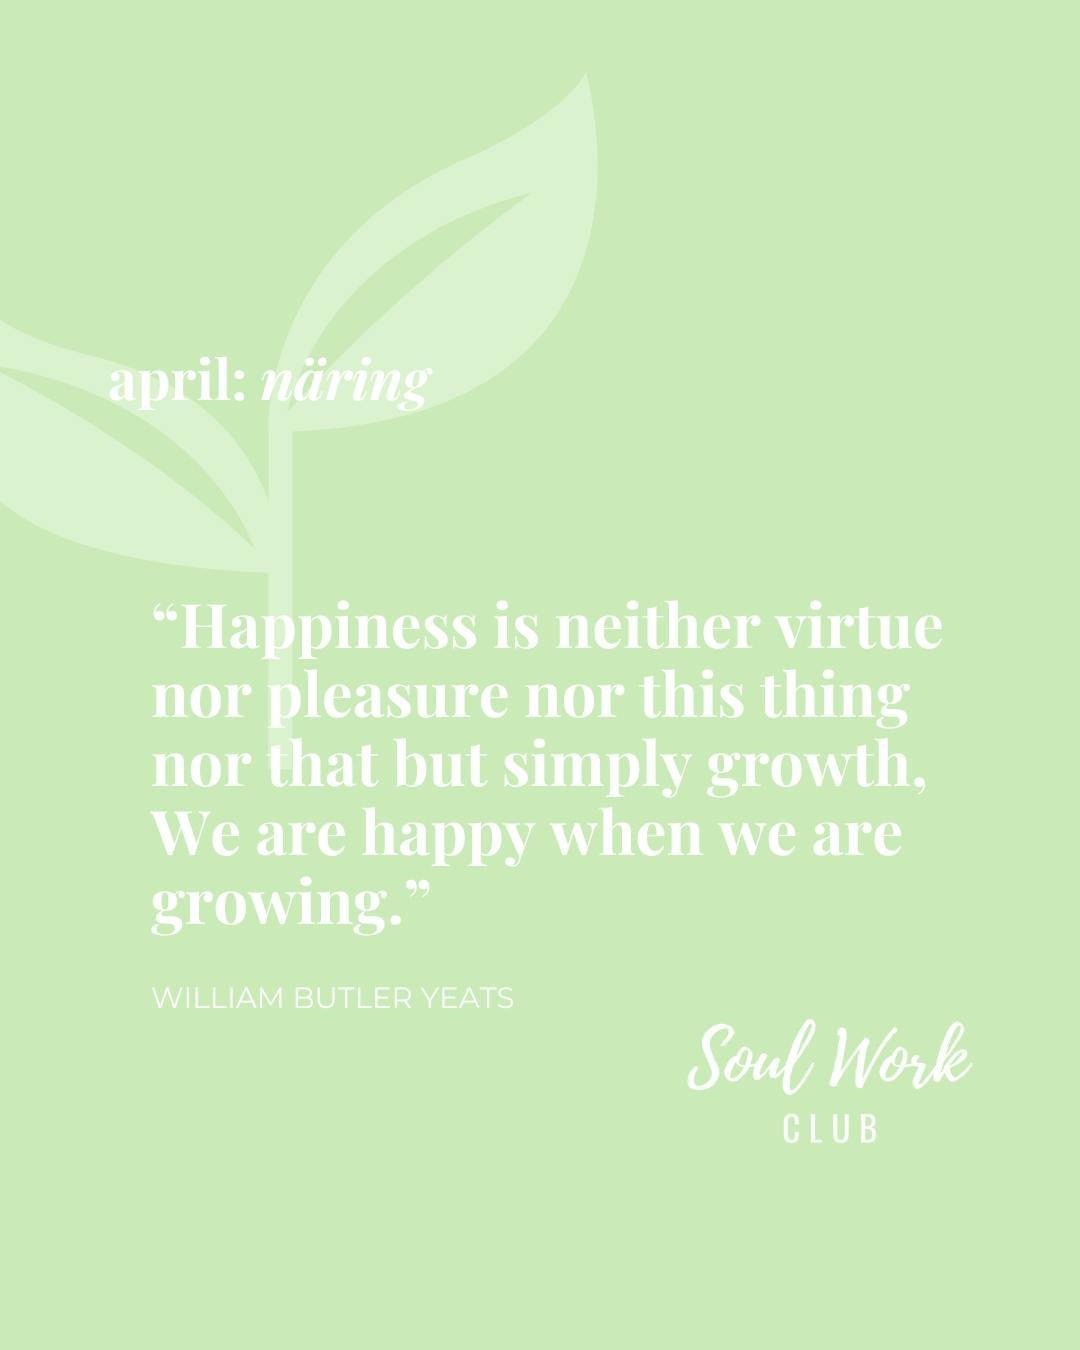 &quot;Happiness is neither virtue nor pleasure nor this thing nor that but simply growth, We are happy when we are growing.&quot;⁠
&ndash; William Butler Yeats⁠
⁠
S&ouml;ndagar i klubben &auml;r f&ouml;r SoulSurfing: Vad g&ouml;r dig tr&ouml;tt? Ta t